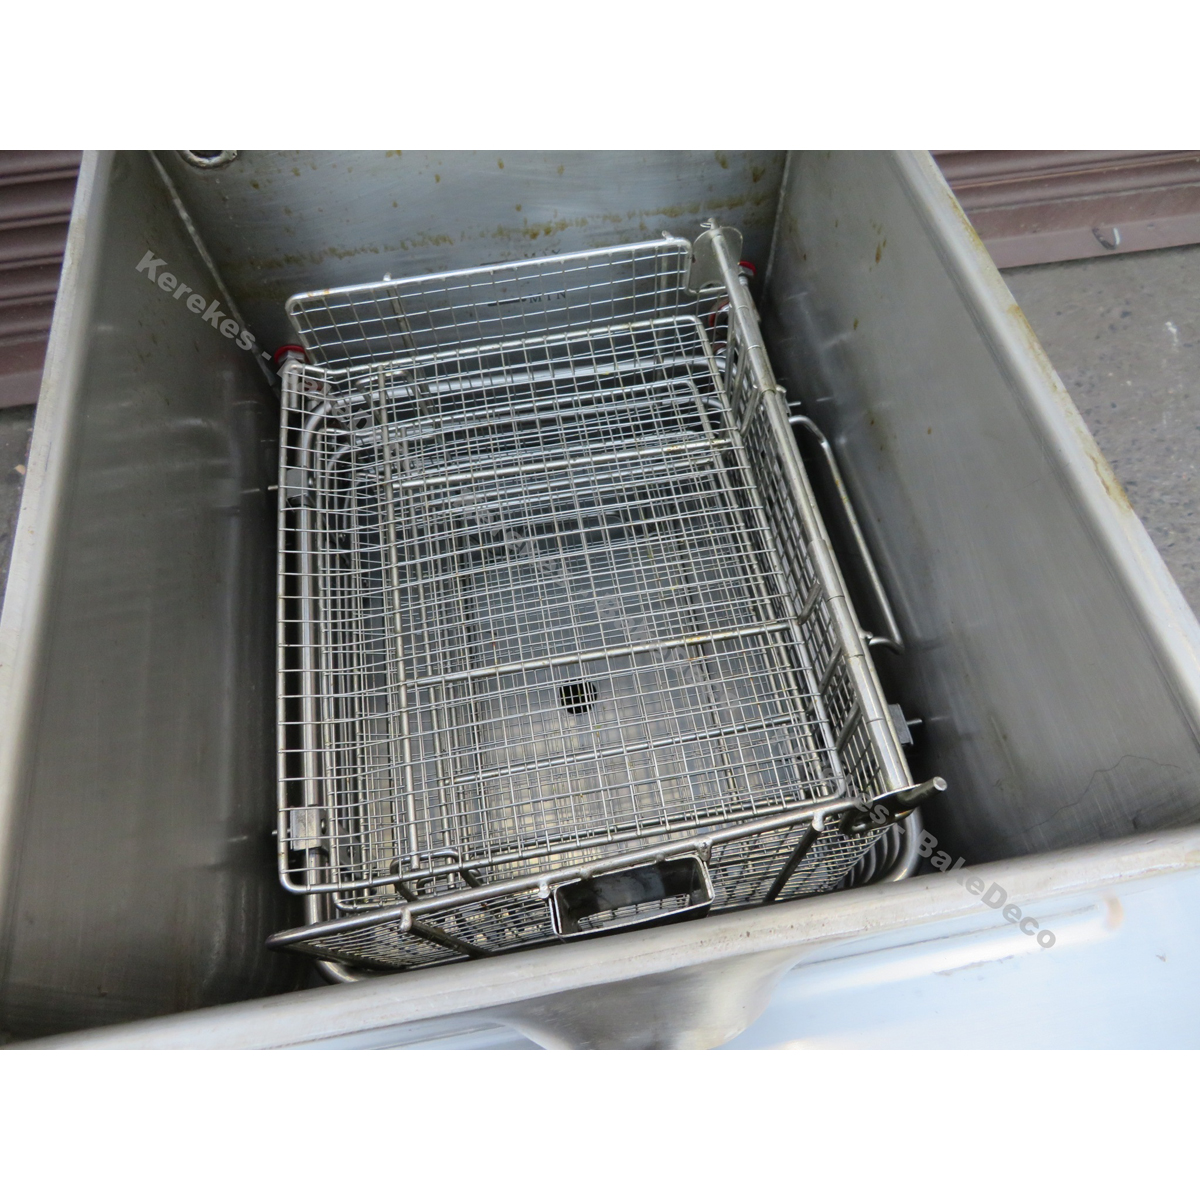 Shine Preassure Fryer P007, Used Great Condition image 7